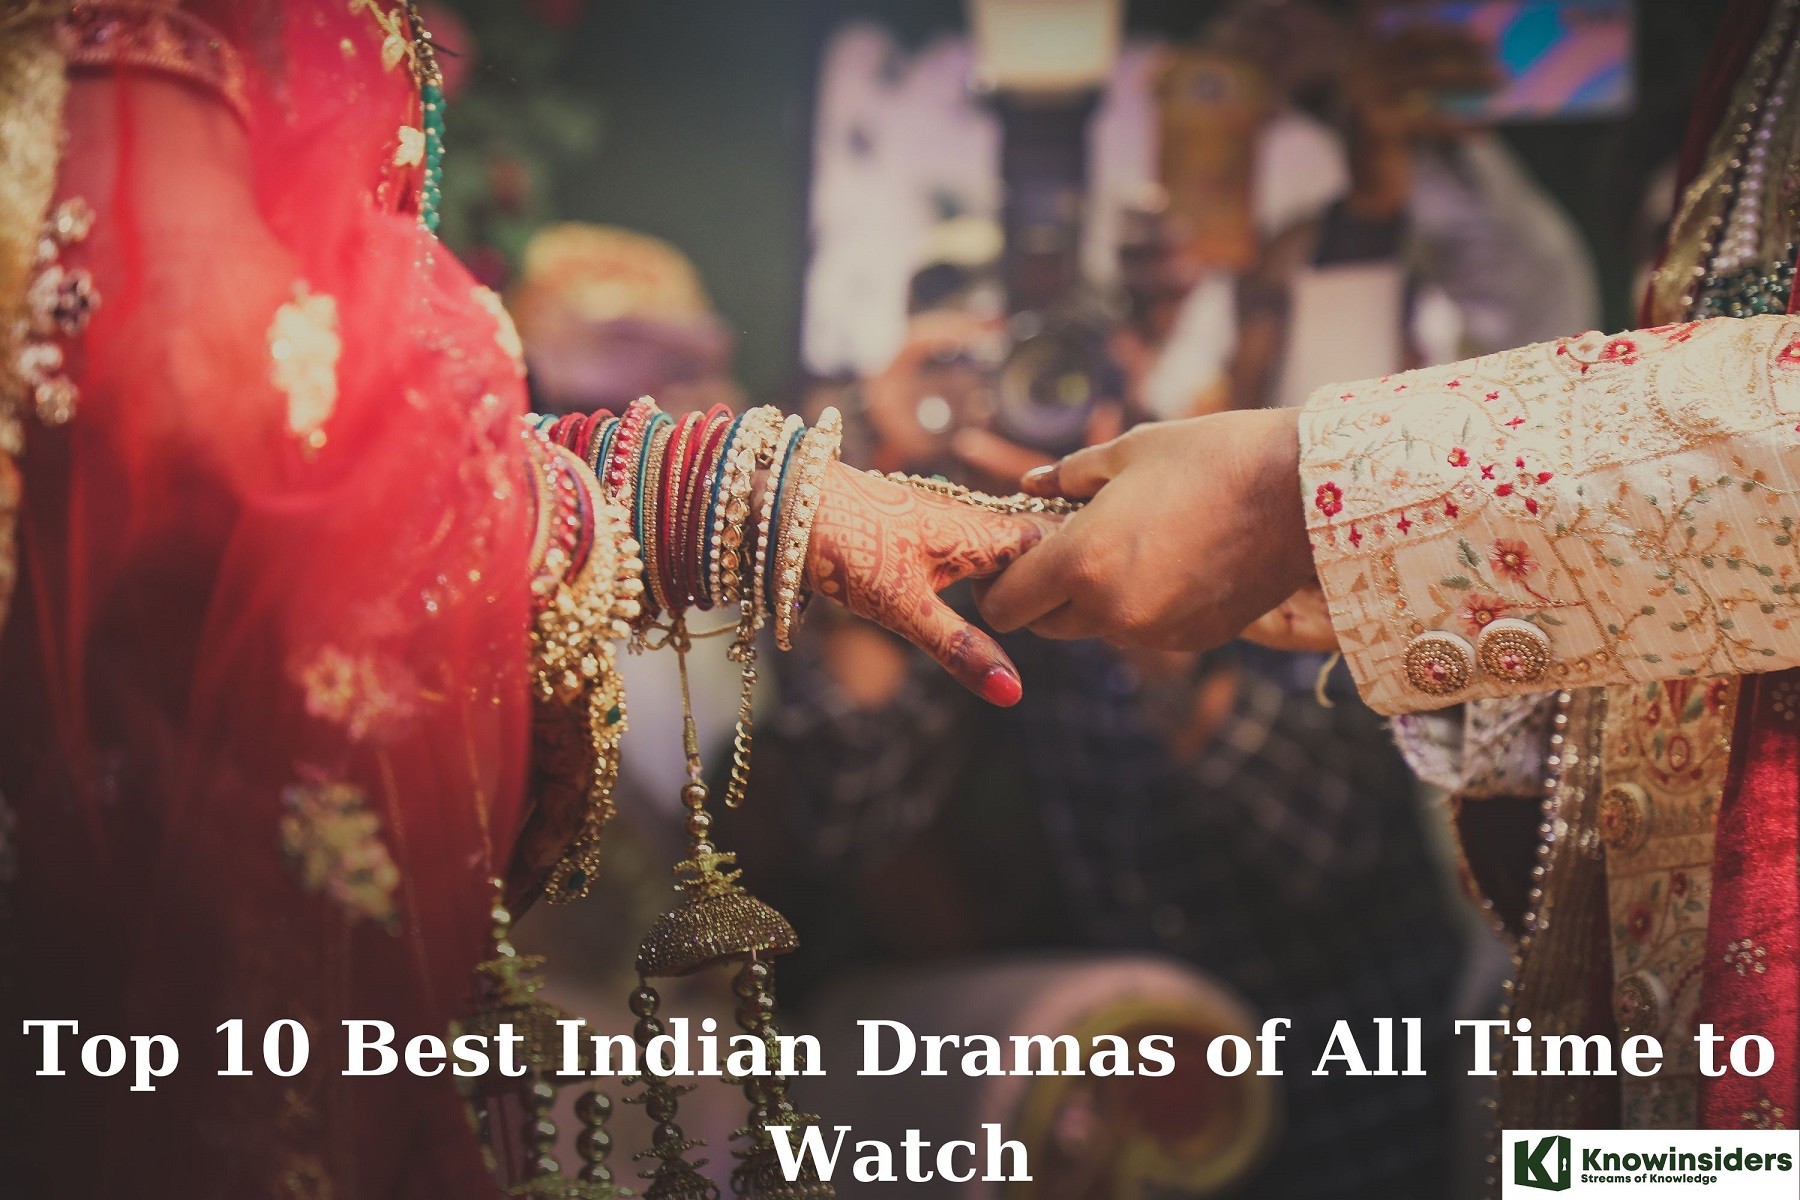 Top 10 Best Indian Dramas of All Time to Watch